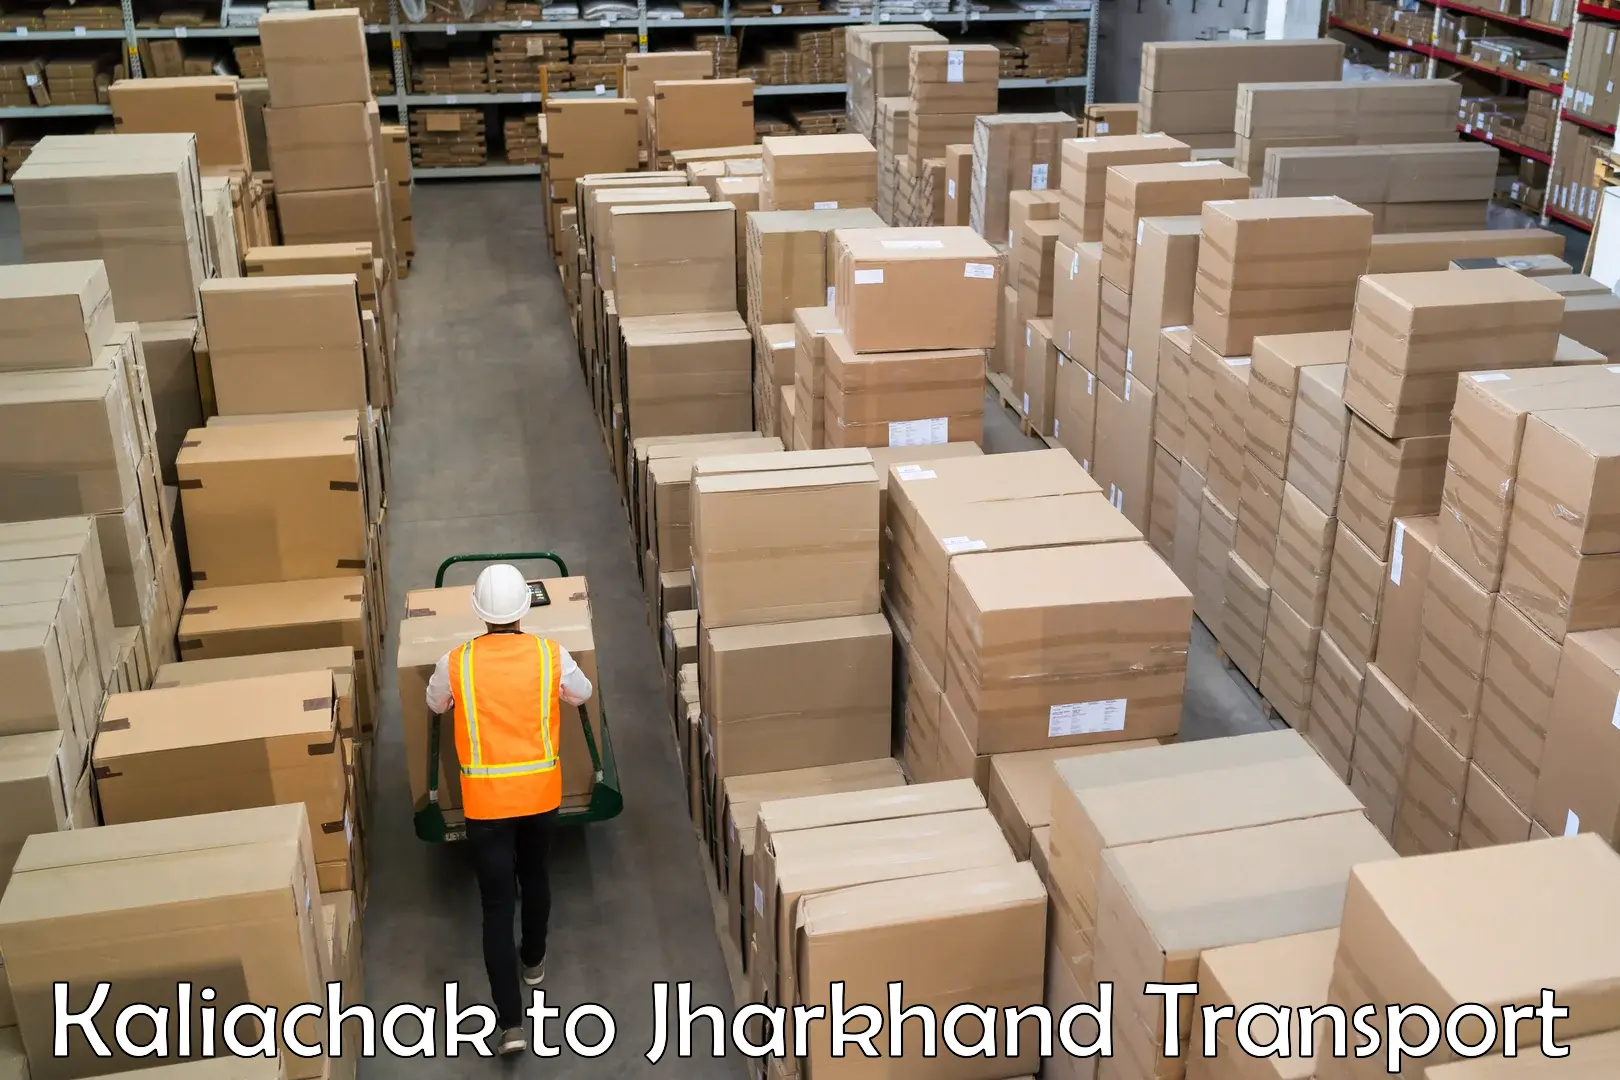 Truck transport companies in India Kaliachak to Jharkhand